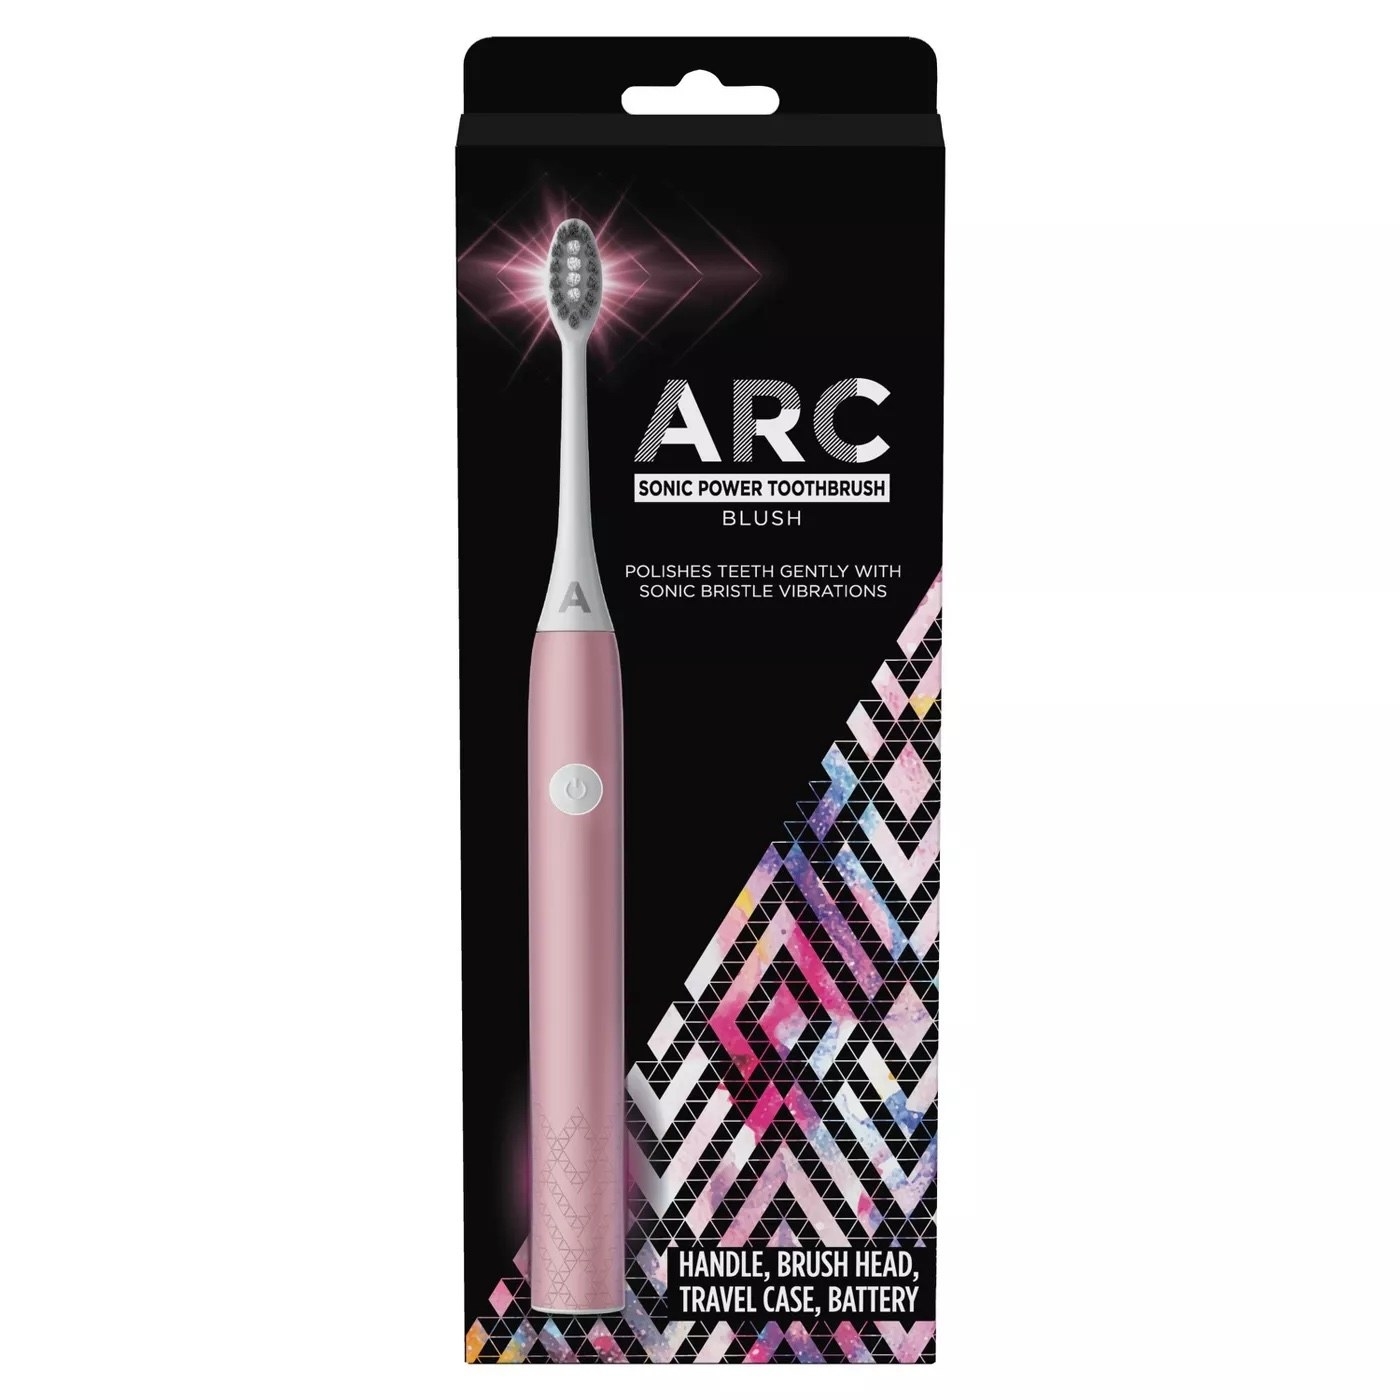 The ARC toothbrush in its packaging